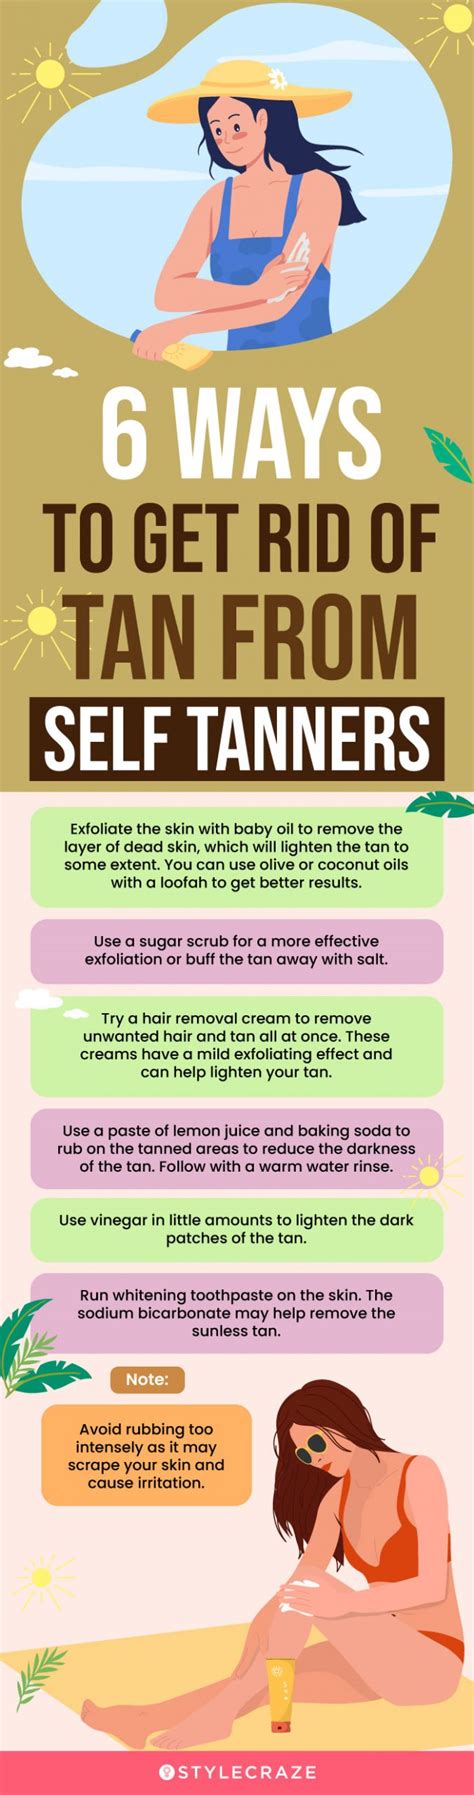 12 Best Face Self Tanners For Acne Prone Skin As Per An Expert